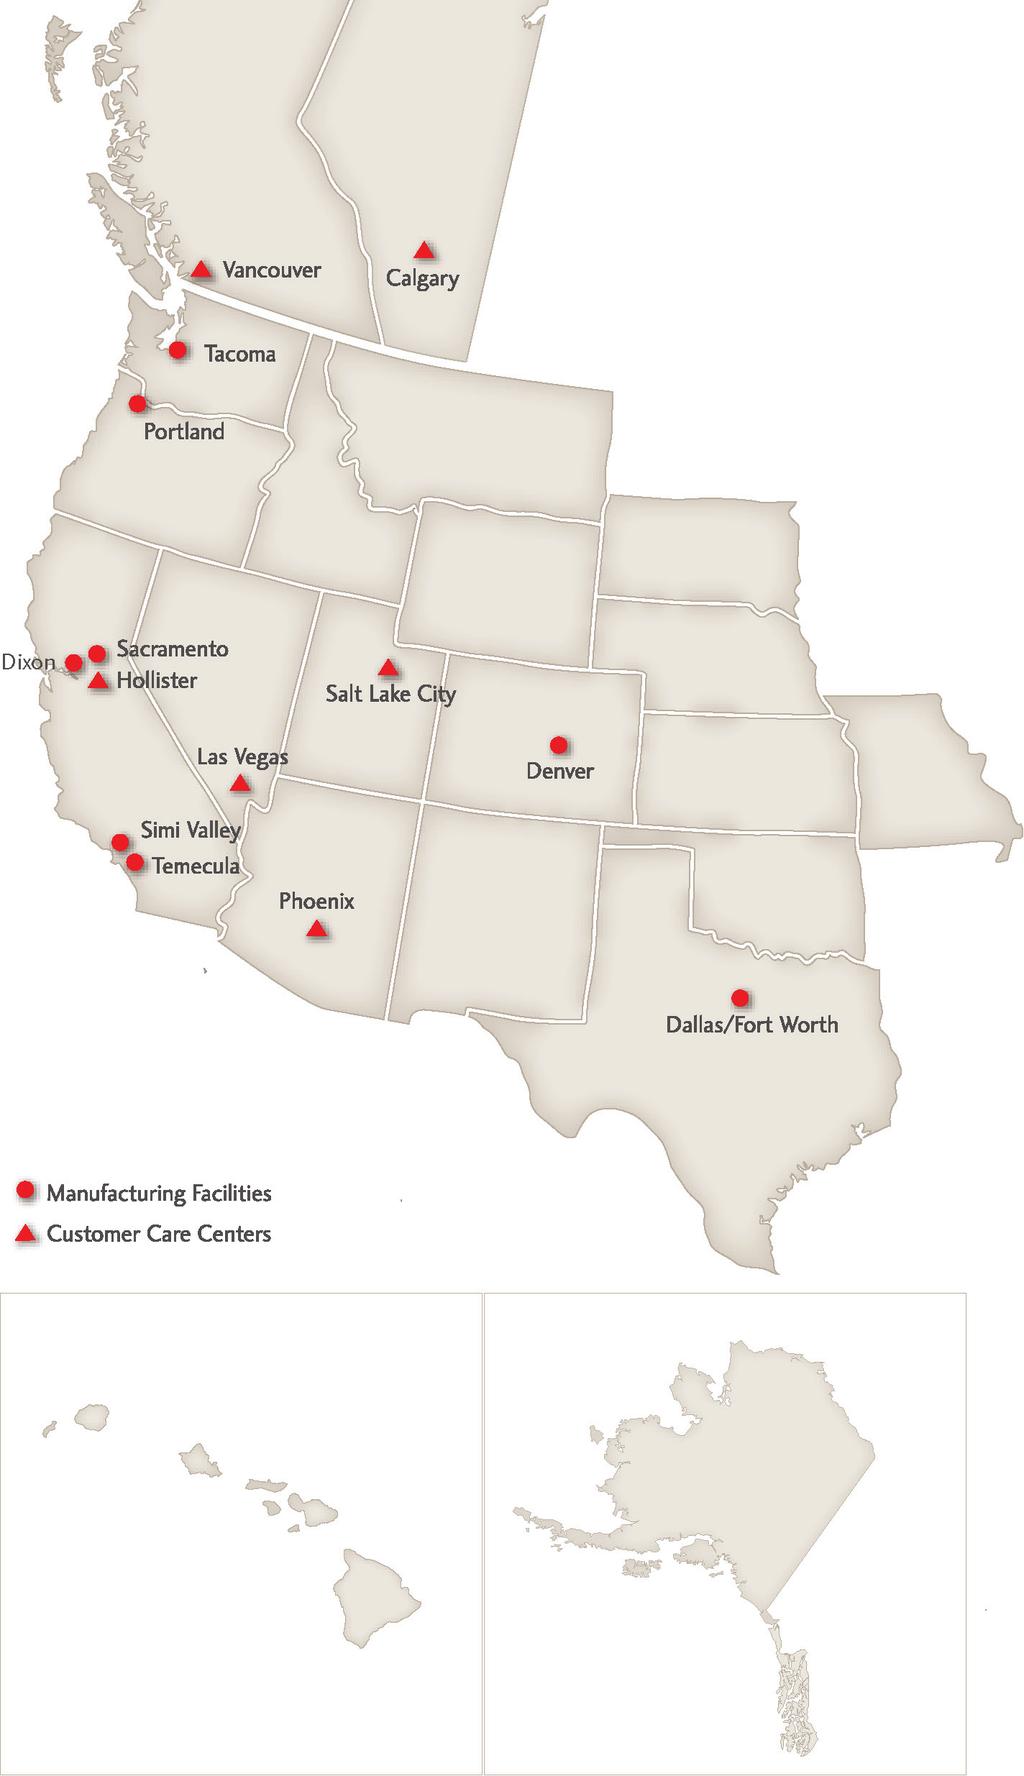 Milgard Windows & Doors is proud to serve the Western U.S. and Canada with over a dozen fullservice facilities and customer care centers.